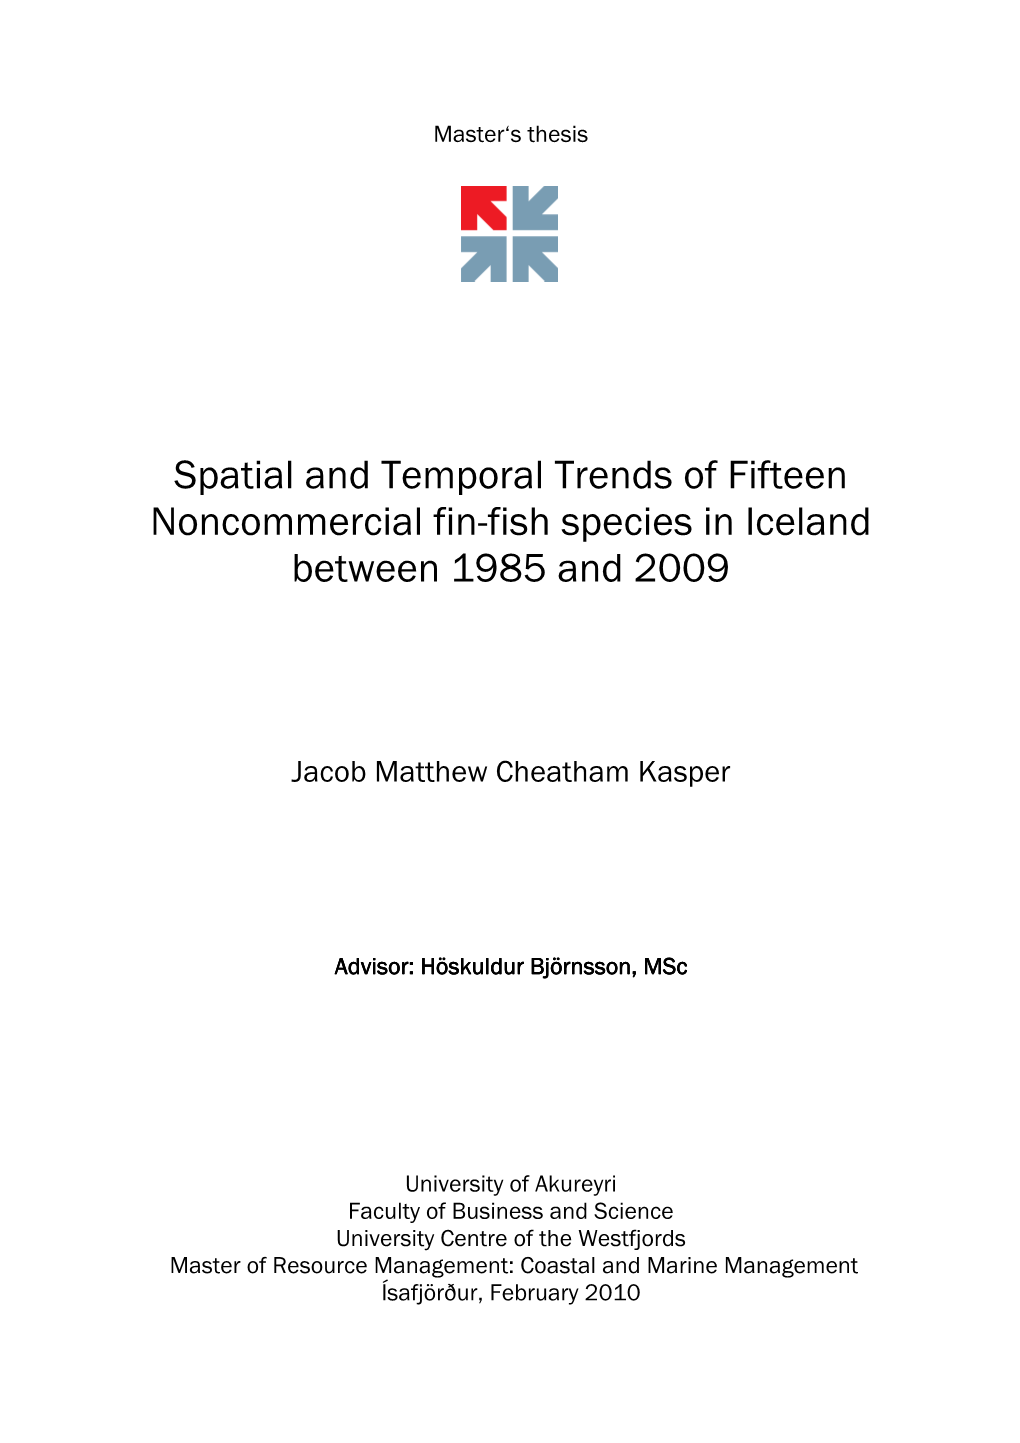 Spatial and Temporal Trends of Fifteen Noncommercial Fin-Fish Species in Iceland Between 1985 and 2009